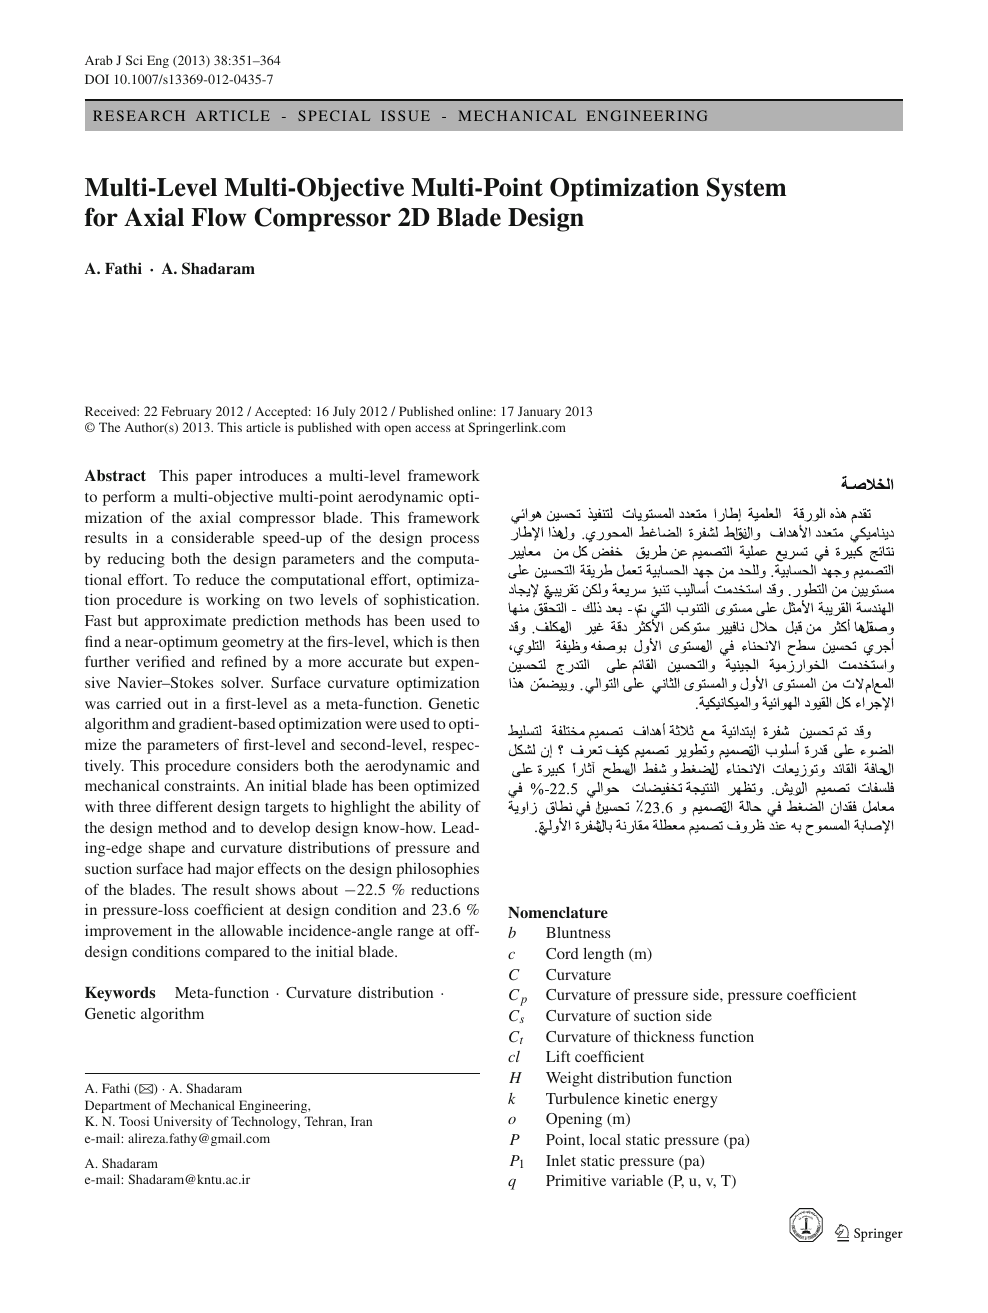 Multi Level Multi Objective Multi Point Optimization System For Axial Flow Compressor 2d Blade Design Topic Of Research Paper In Mechanical Engineering Download Scholarly Article Pdf And Read For Free On Cyberleninka Open Science